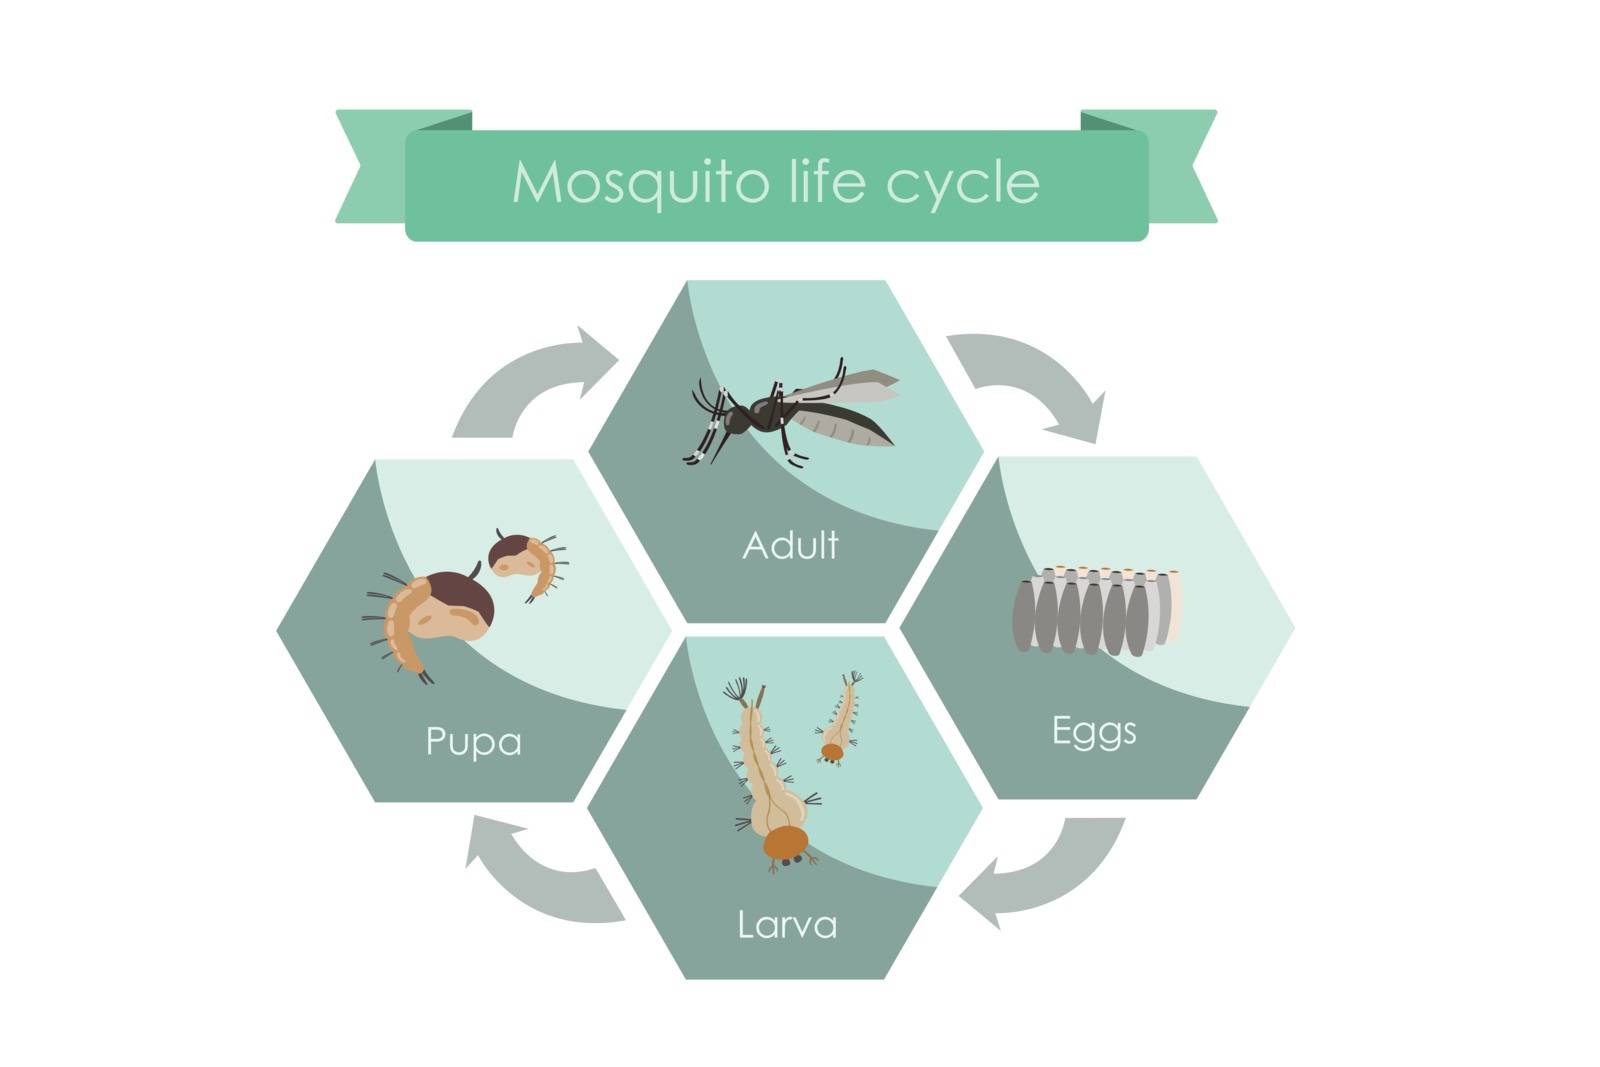 Life cycle of mosquitoes from egg to adult. Display chart showing life cycle of mosquito. by Eungsuwat